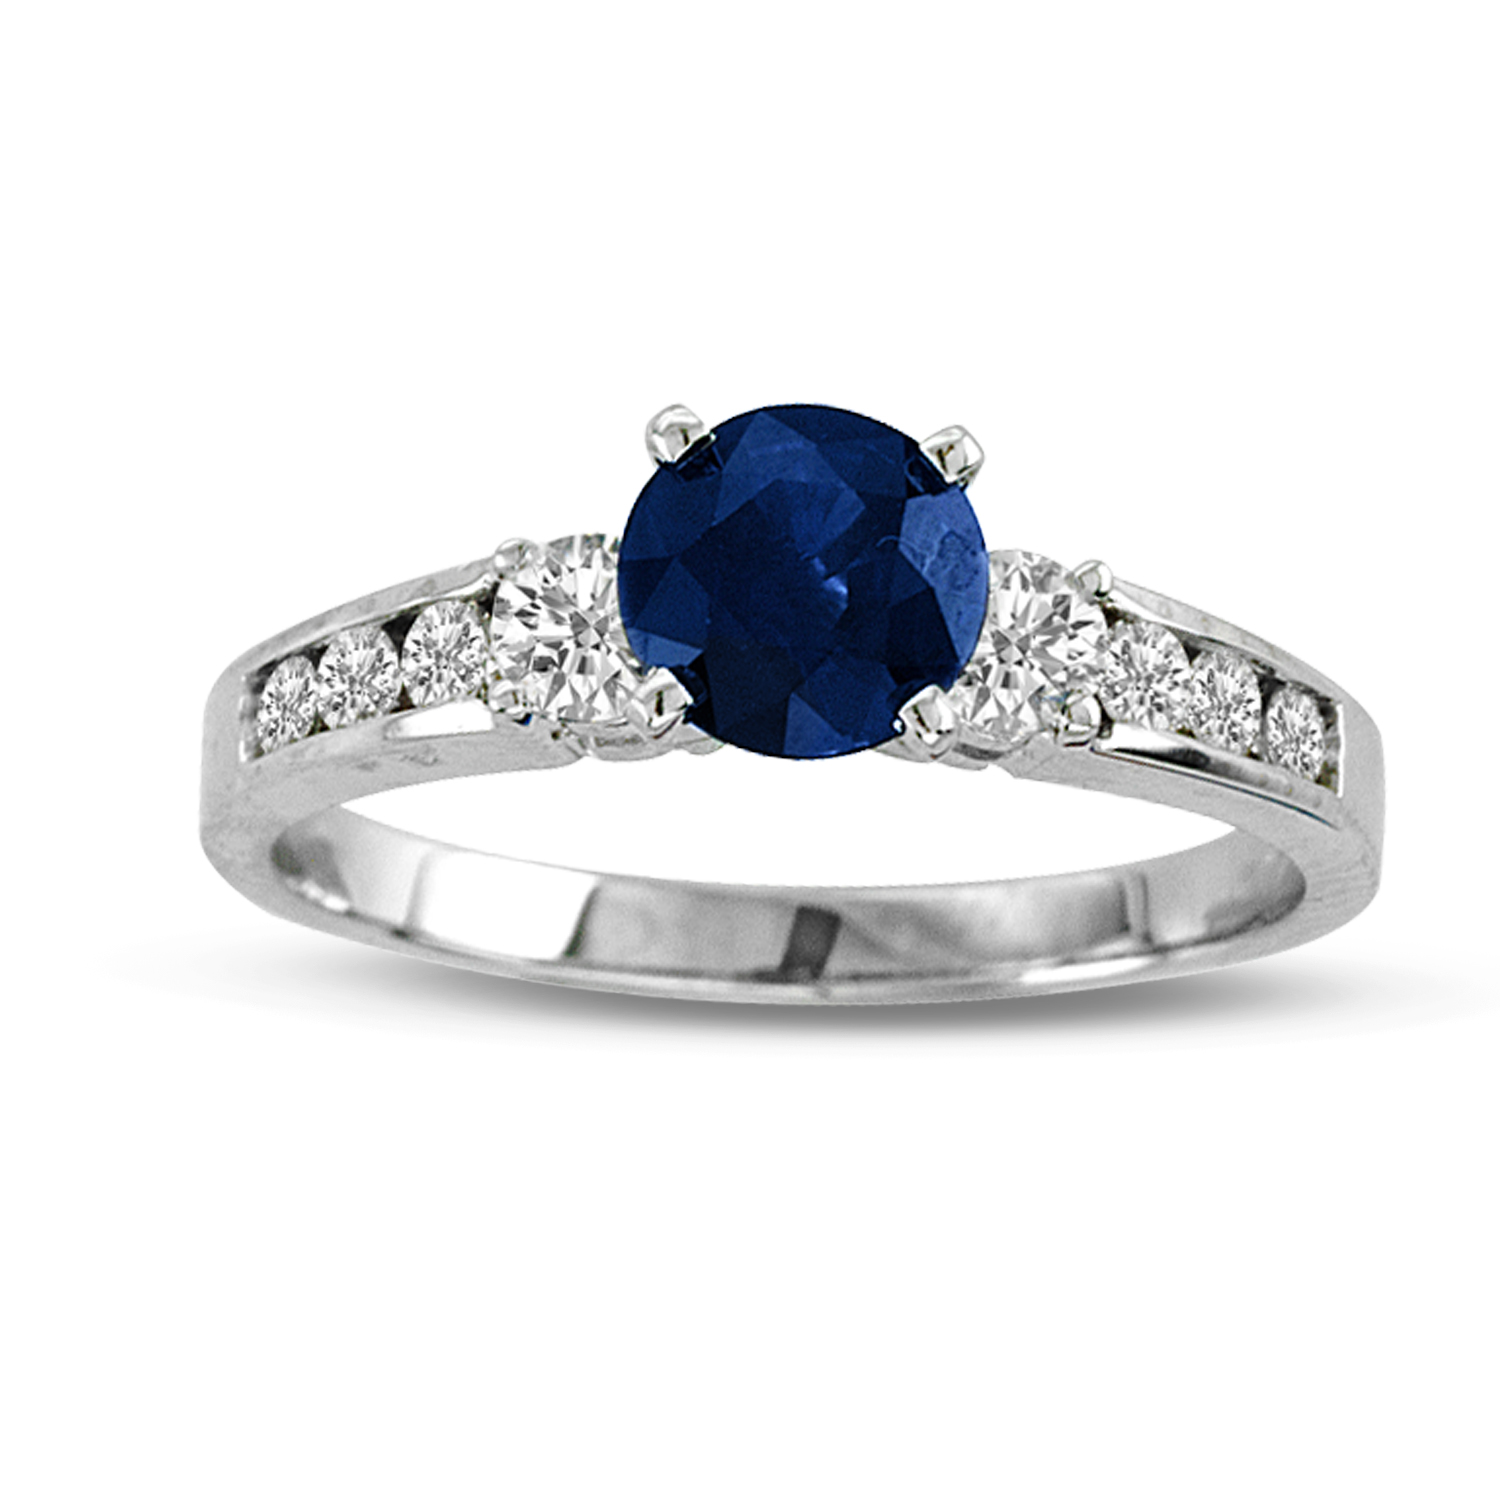 View 1.28cttw Round Sapphire and Diamond Engagement Ring set in 14k Gold